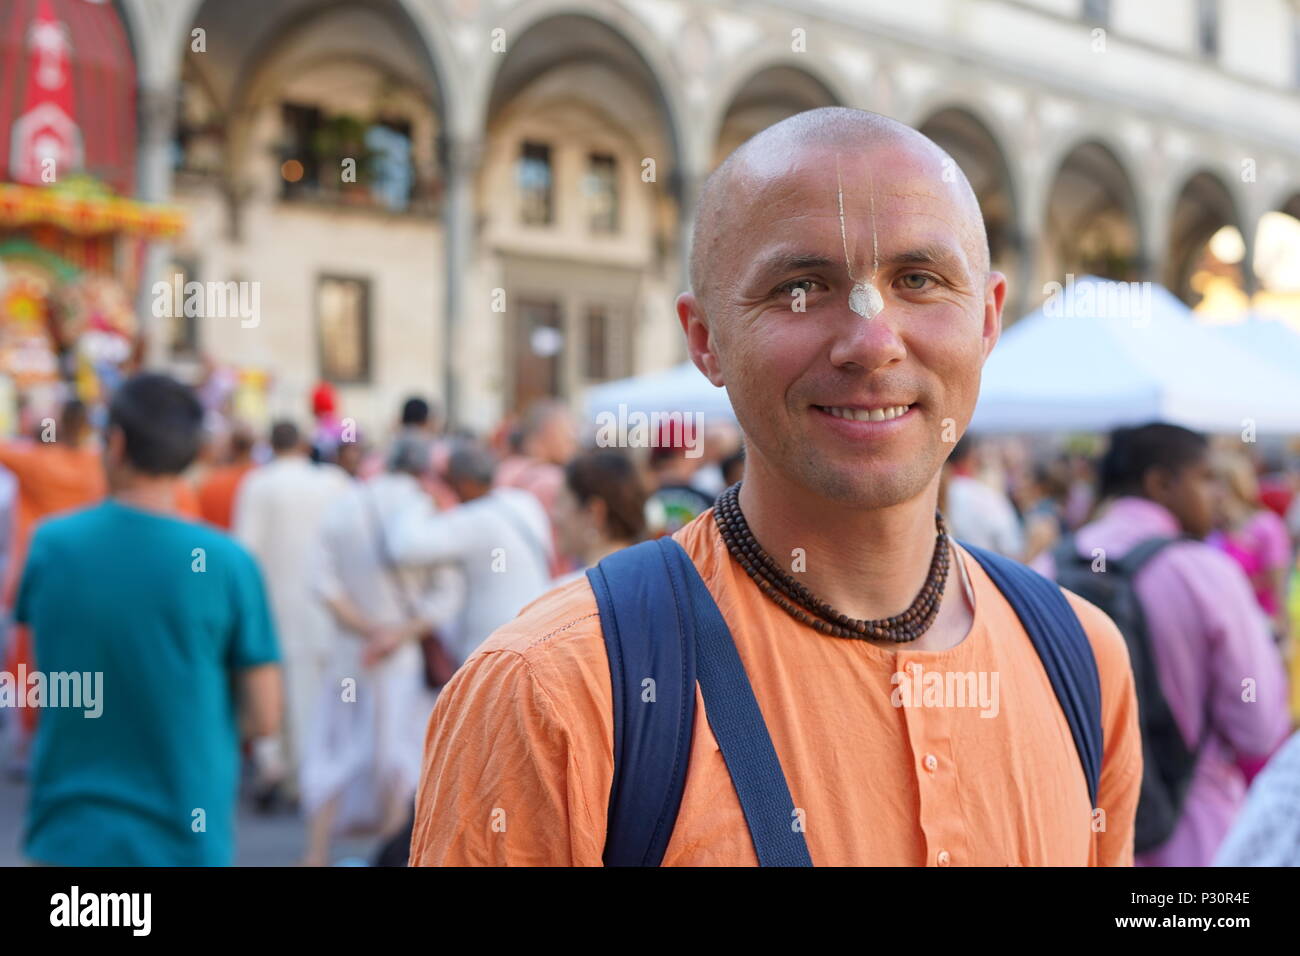 An happy Hare Krisna monk smiles with devotion and compassion Stock Photo